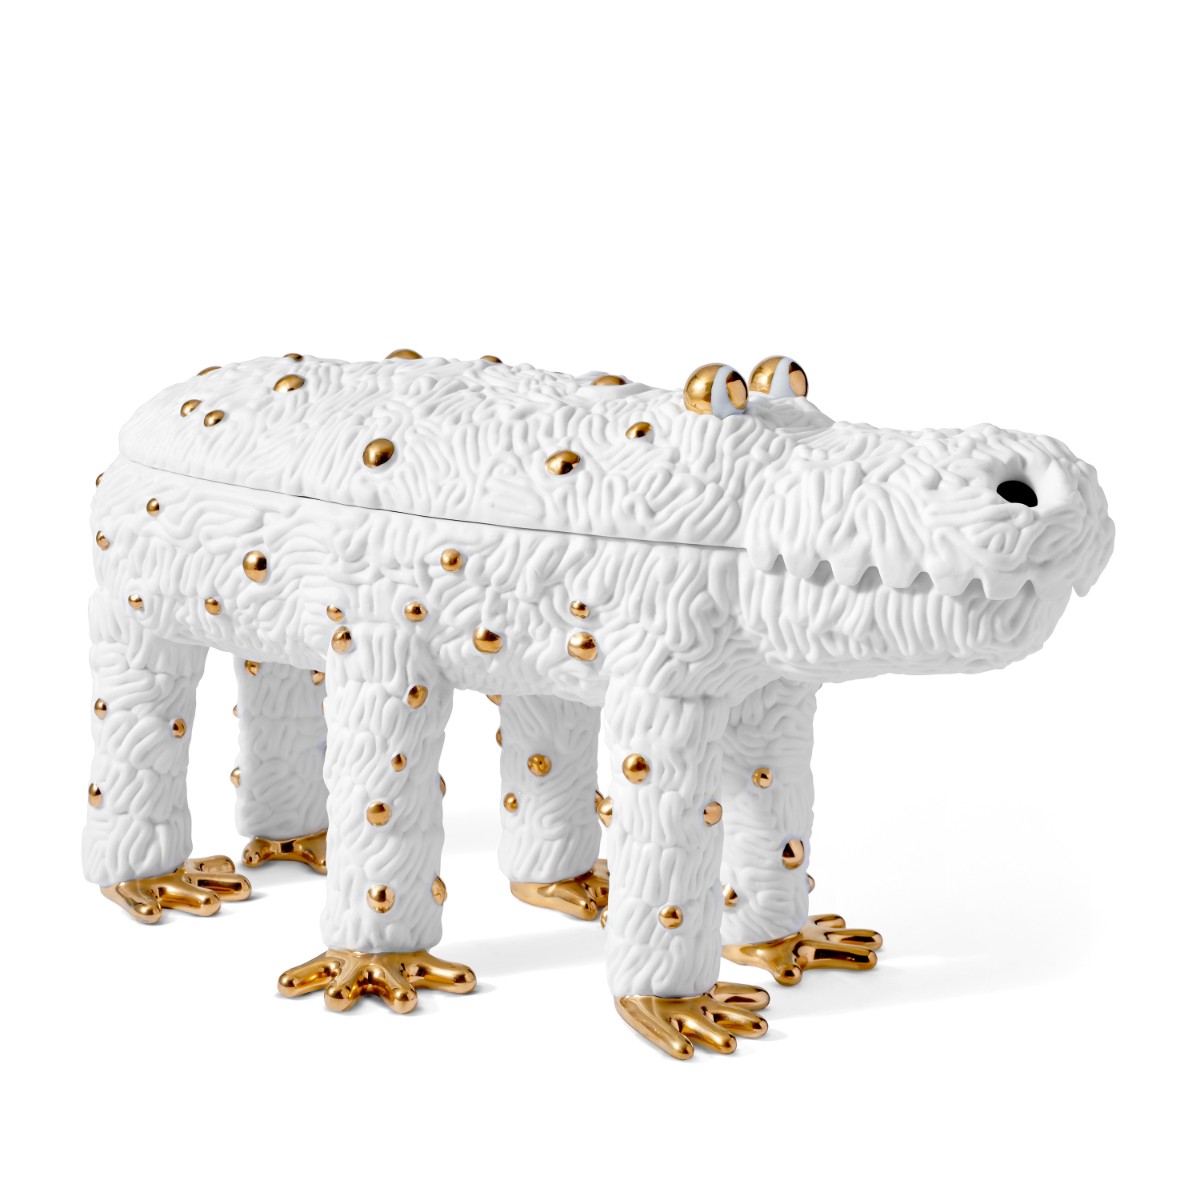 L’Objet | HAAS Brothers | Pedro The Croc Box - Limited Edition of 250